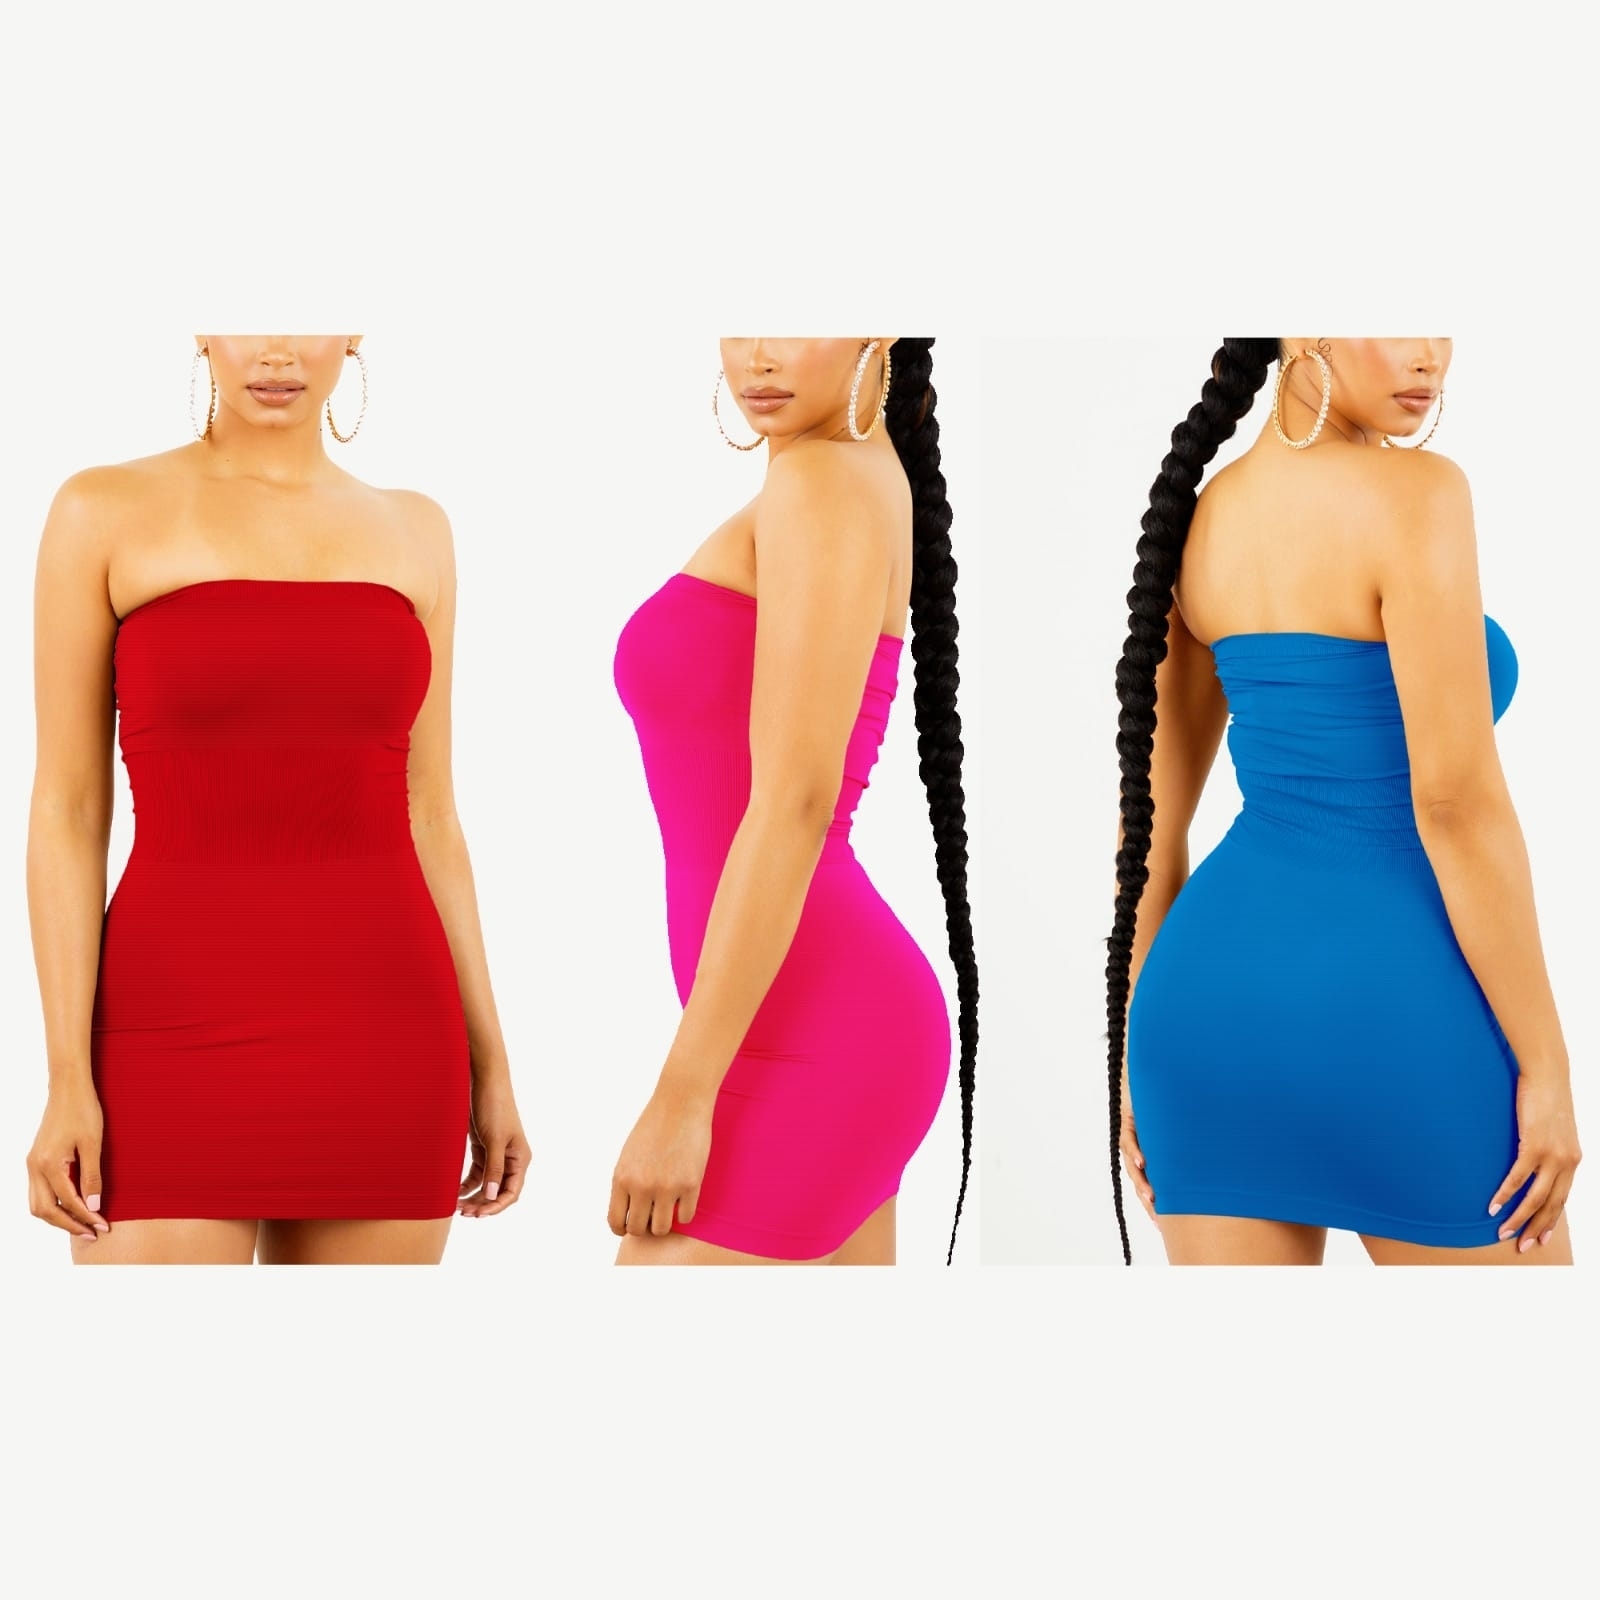 2-Pack Women's Strapless Stretchy Tight Fit Seamless Body Con Mini Tube Top Dress - BLUE, S